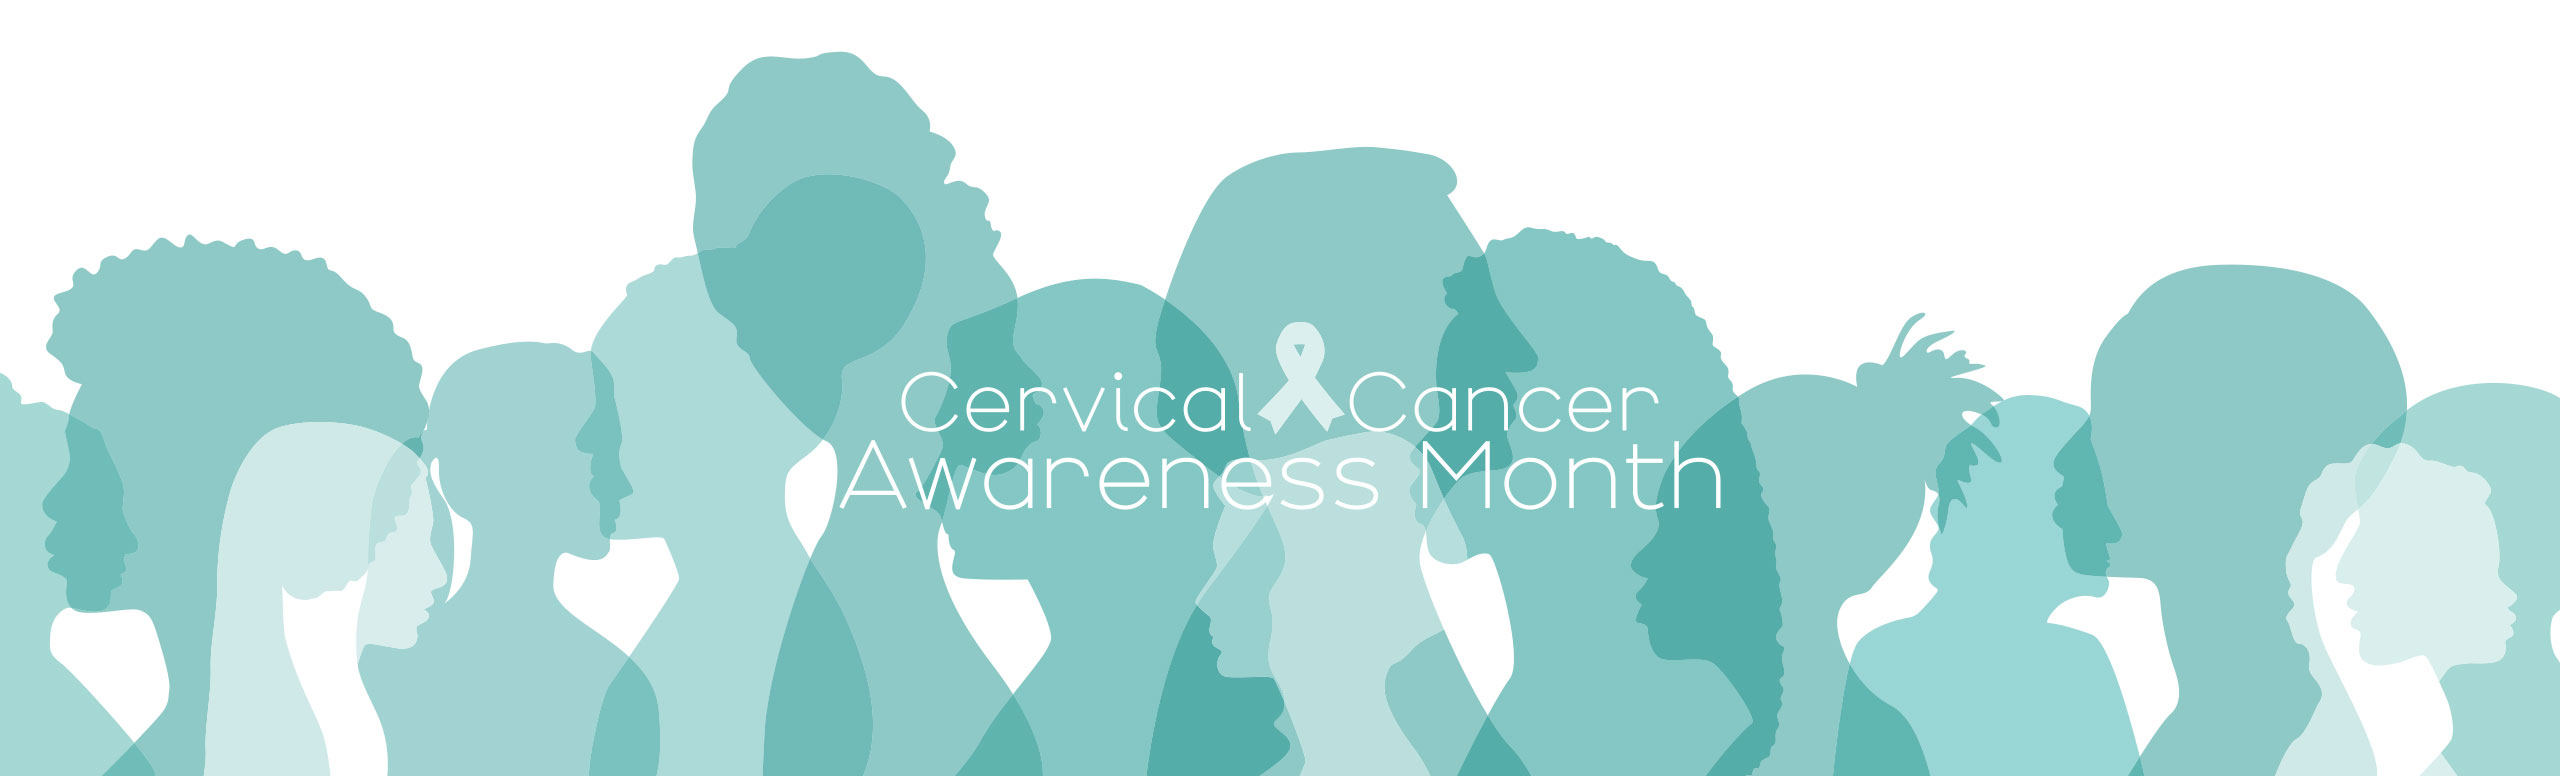 Cervical awareness month
Pictured is images of females of different ages.